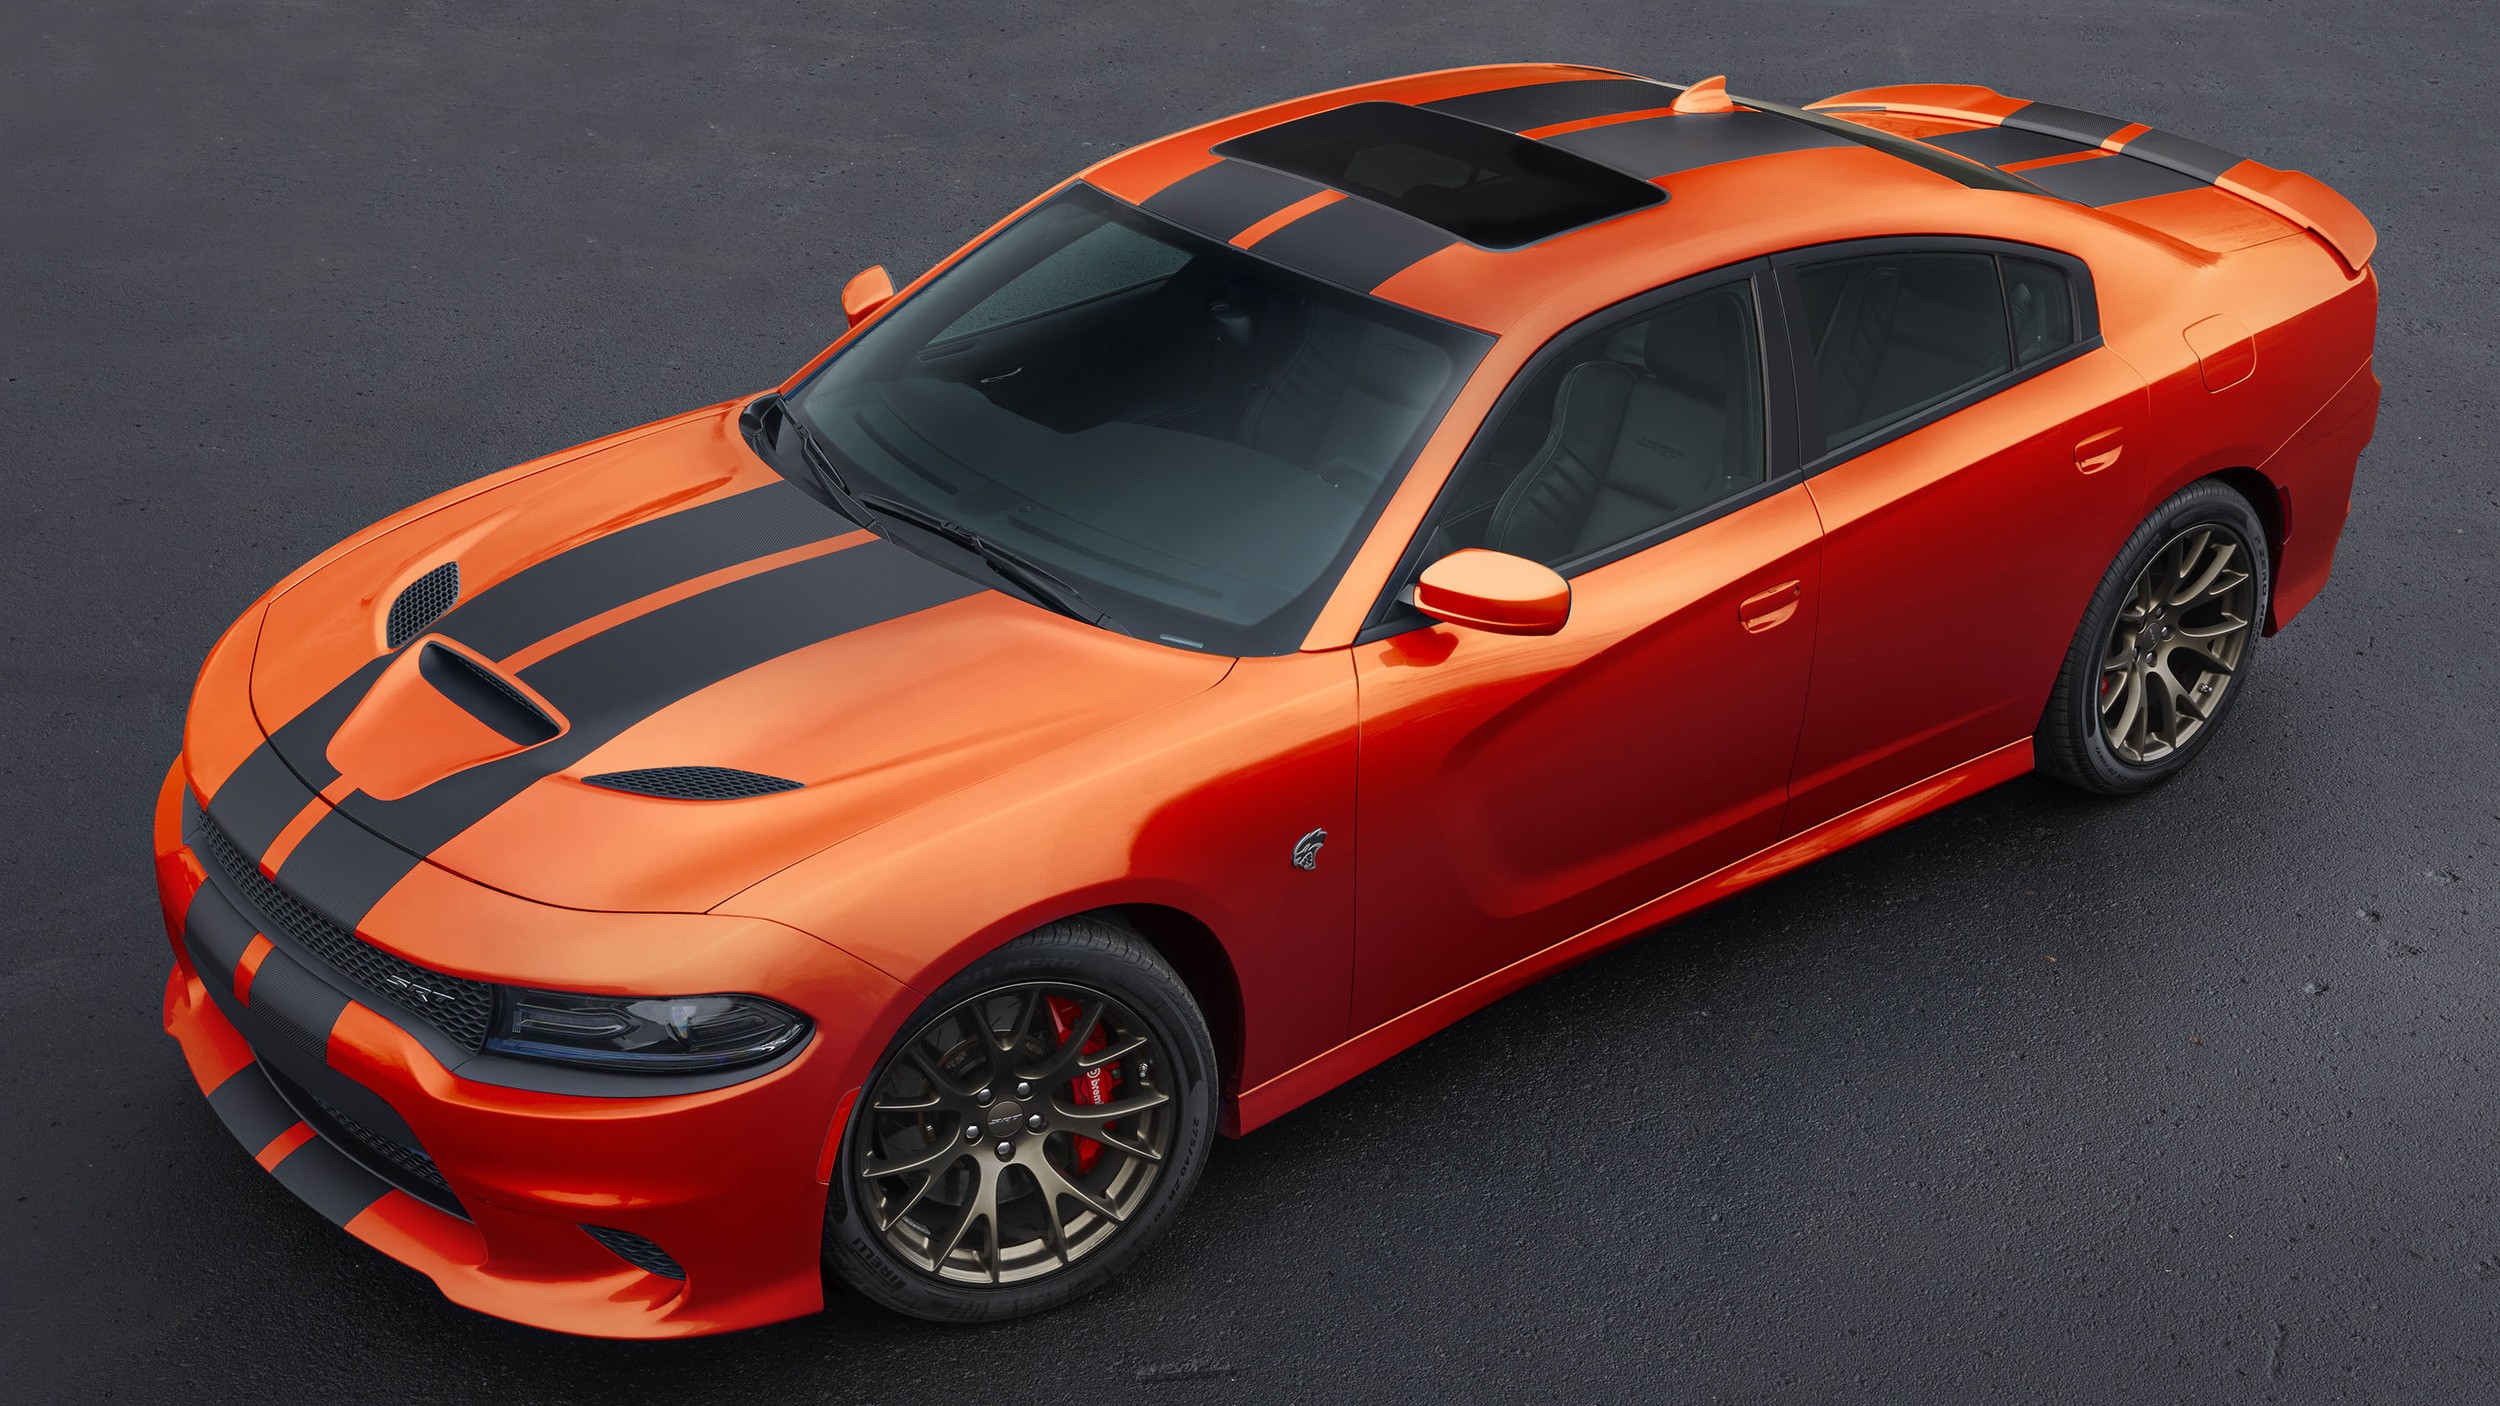 Go Mango Paint Is Now on Regular 2016 Dodge Charger and Challenger